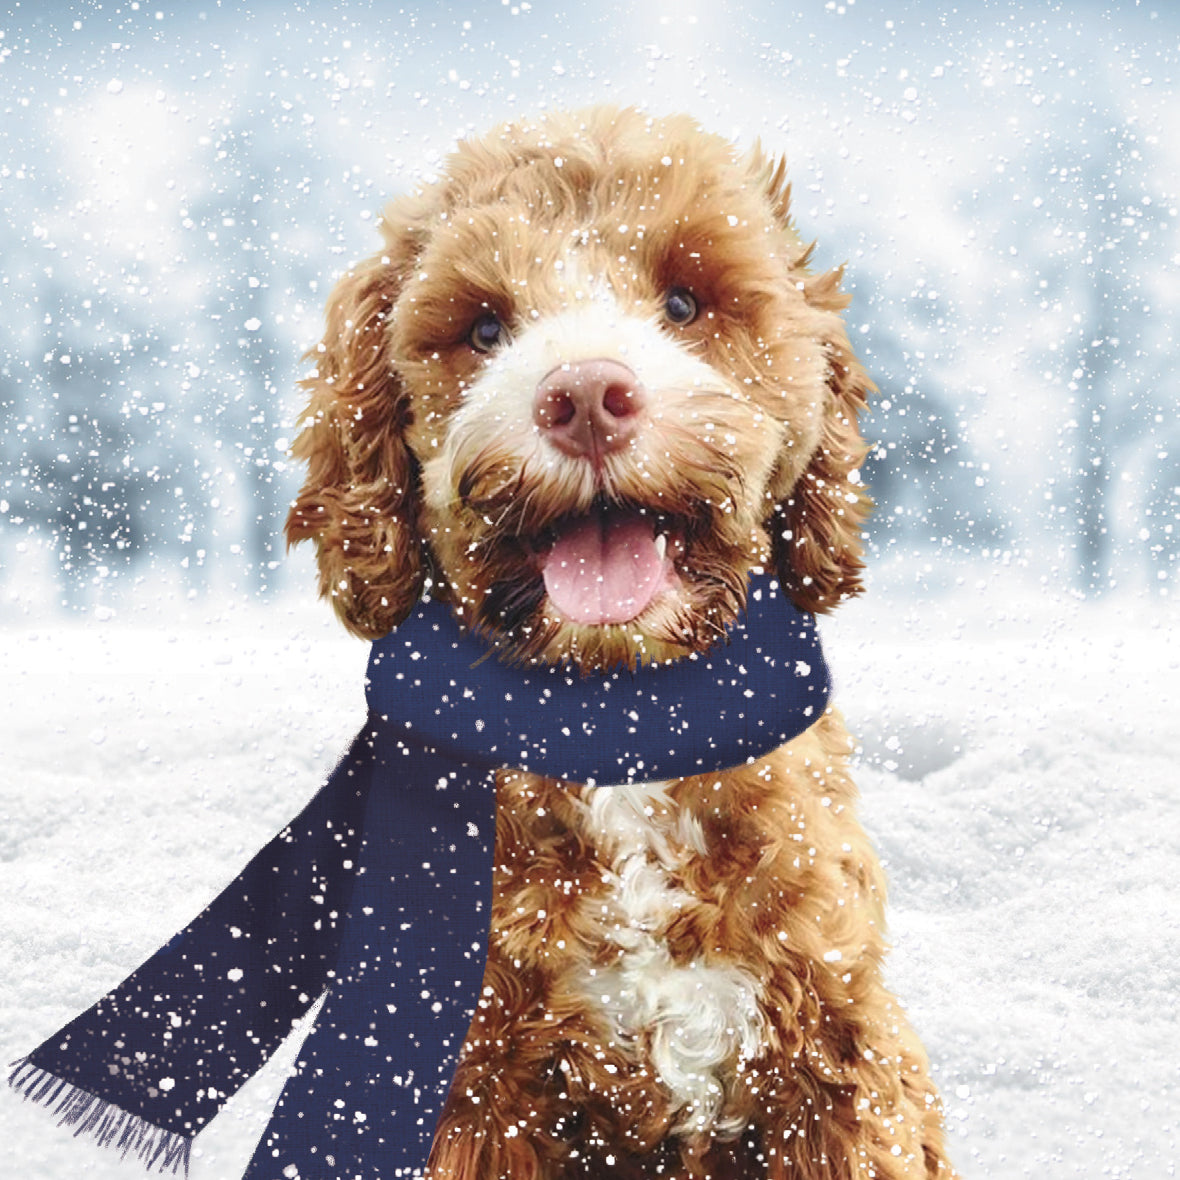 Pack of 8 Louie In Snow Cute Dog Mini Charity Christmas Cards